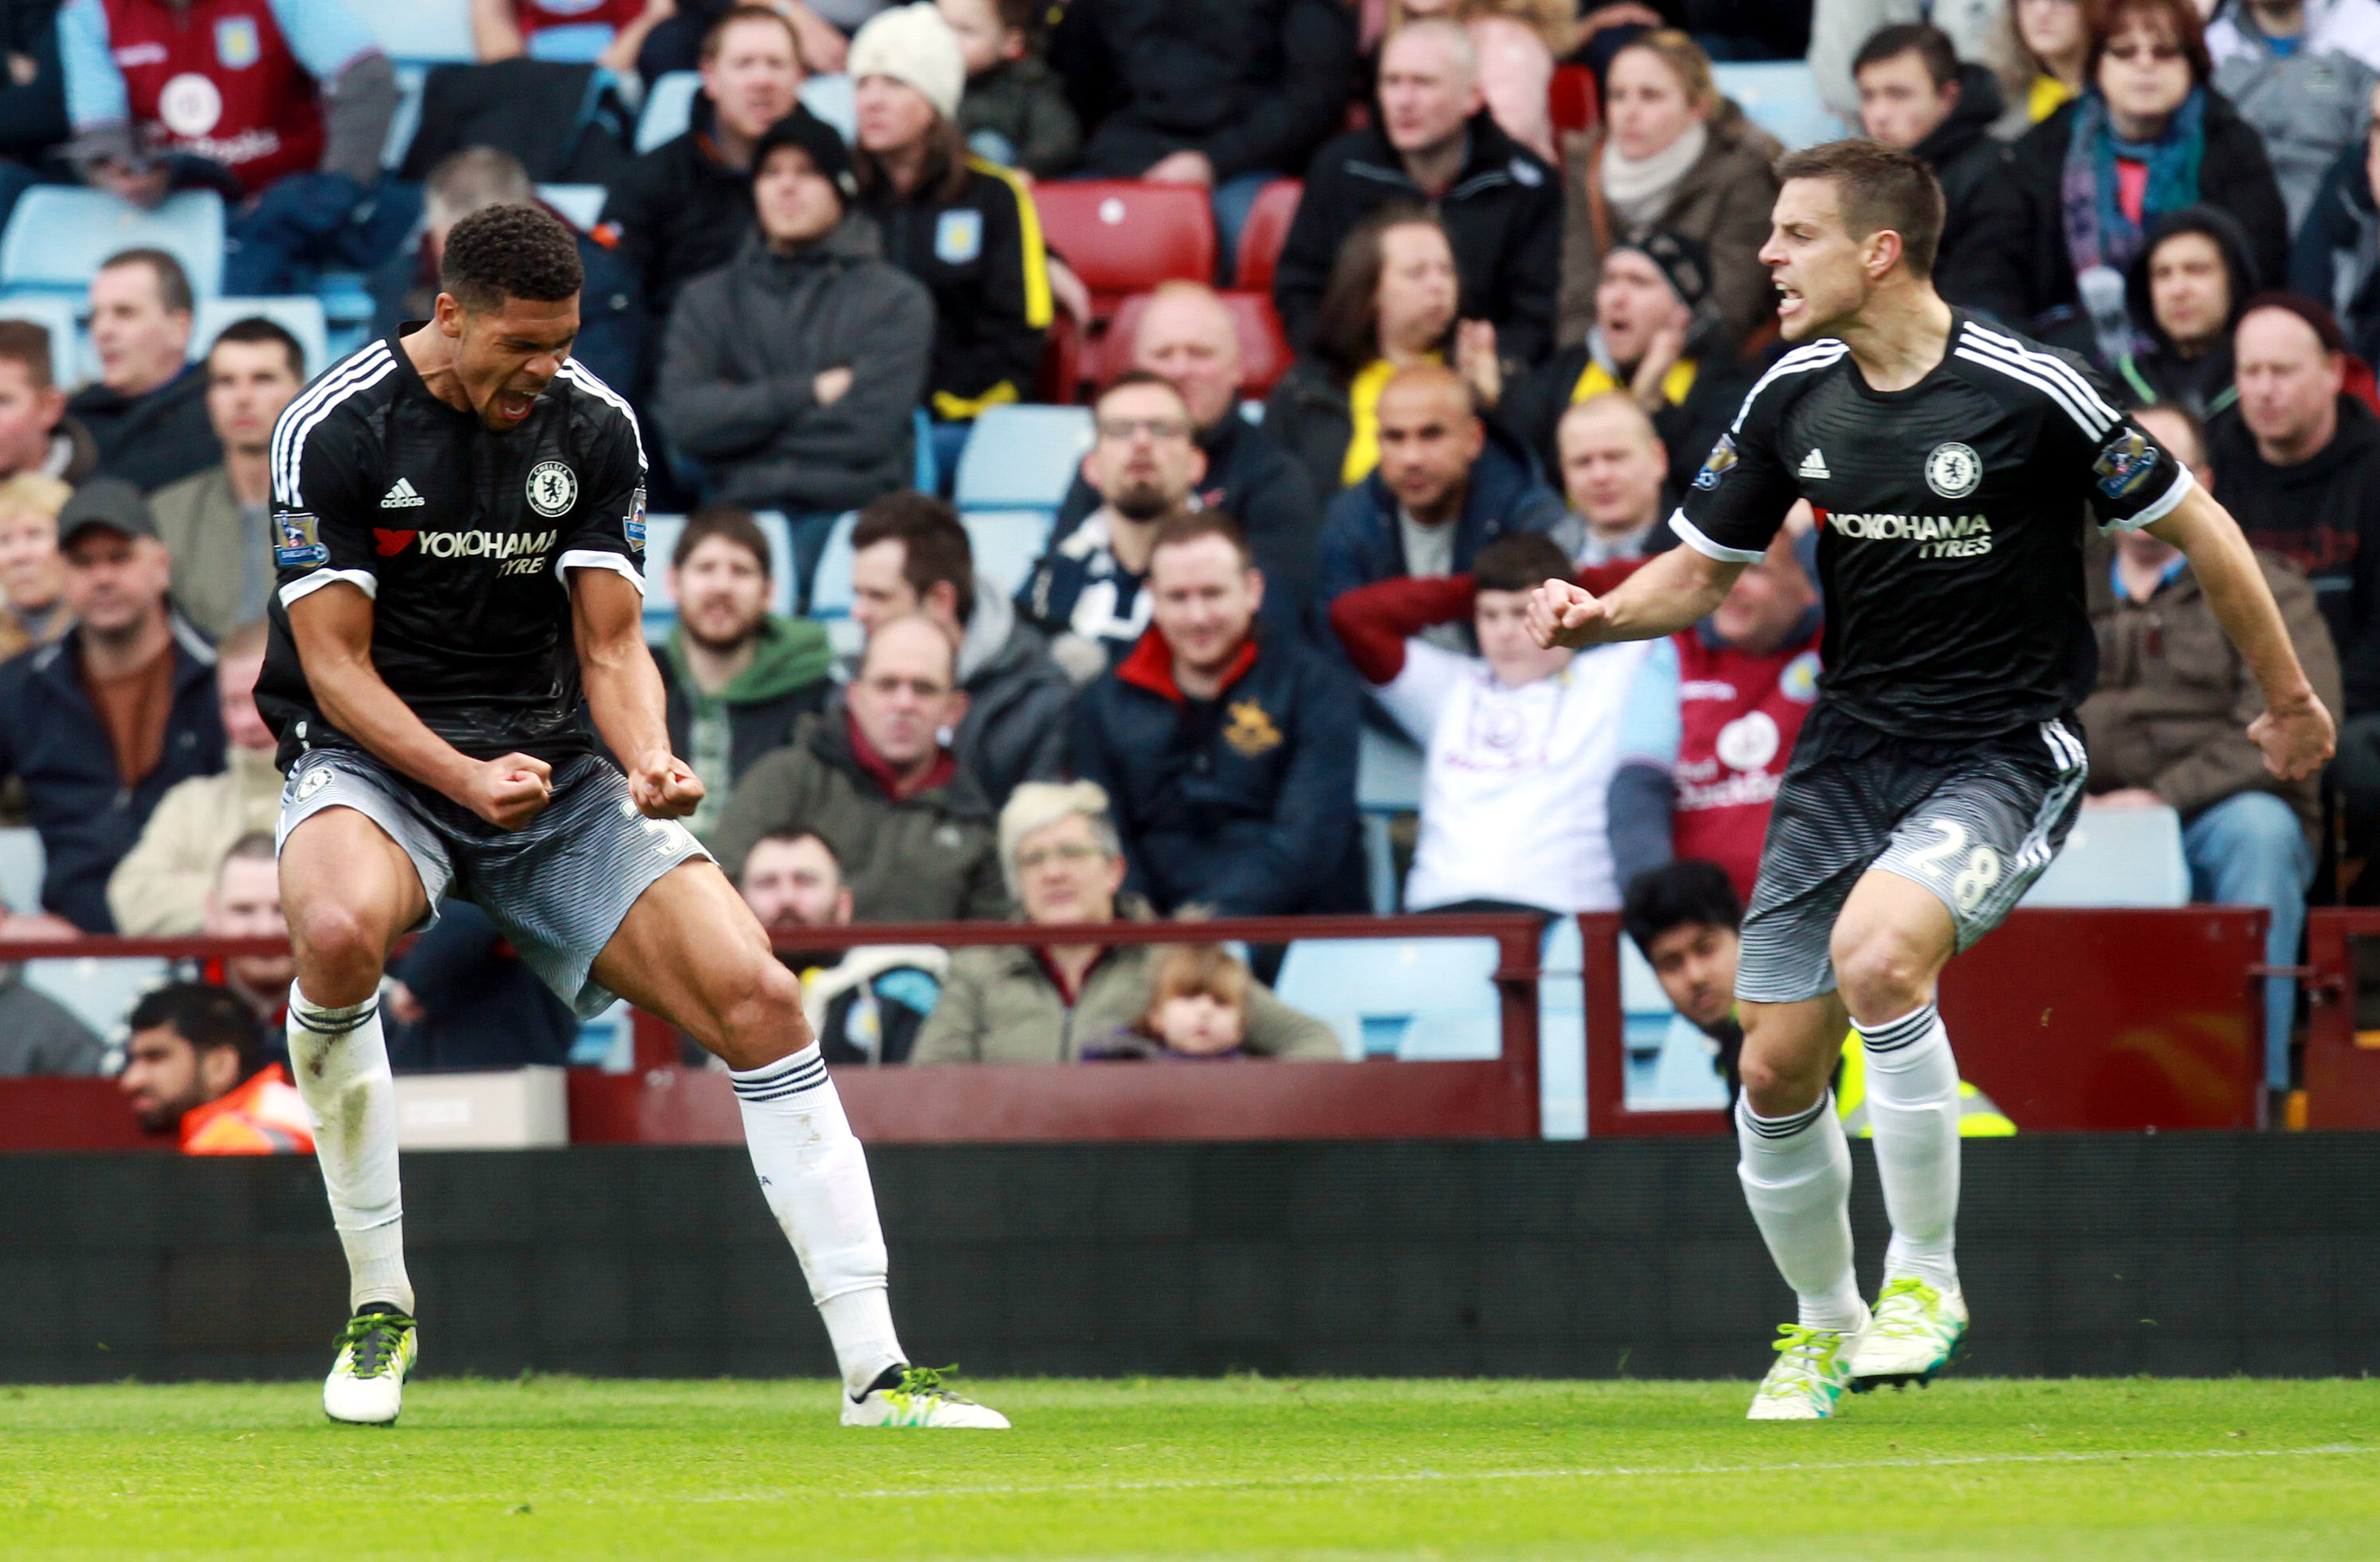 epa05240583 Chelsea's Ruben Loftus-Cheek (L) celebrates his goal with team-mate Cesar Azpilicueta during the English Premier League match between Aston Villa and Chelsea at Villa Park in Birmingham, Britain, 02 April 2016.  EPA/SEAN DEMPSEY EDITORIAL USE ONLY. No use with unauthorized audio, video, data, fixture lists, club/league logos or 'live' services. Online in-match use limited to 75 images, no video emulation. No use in betting, games or single club/league/player publications.